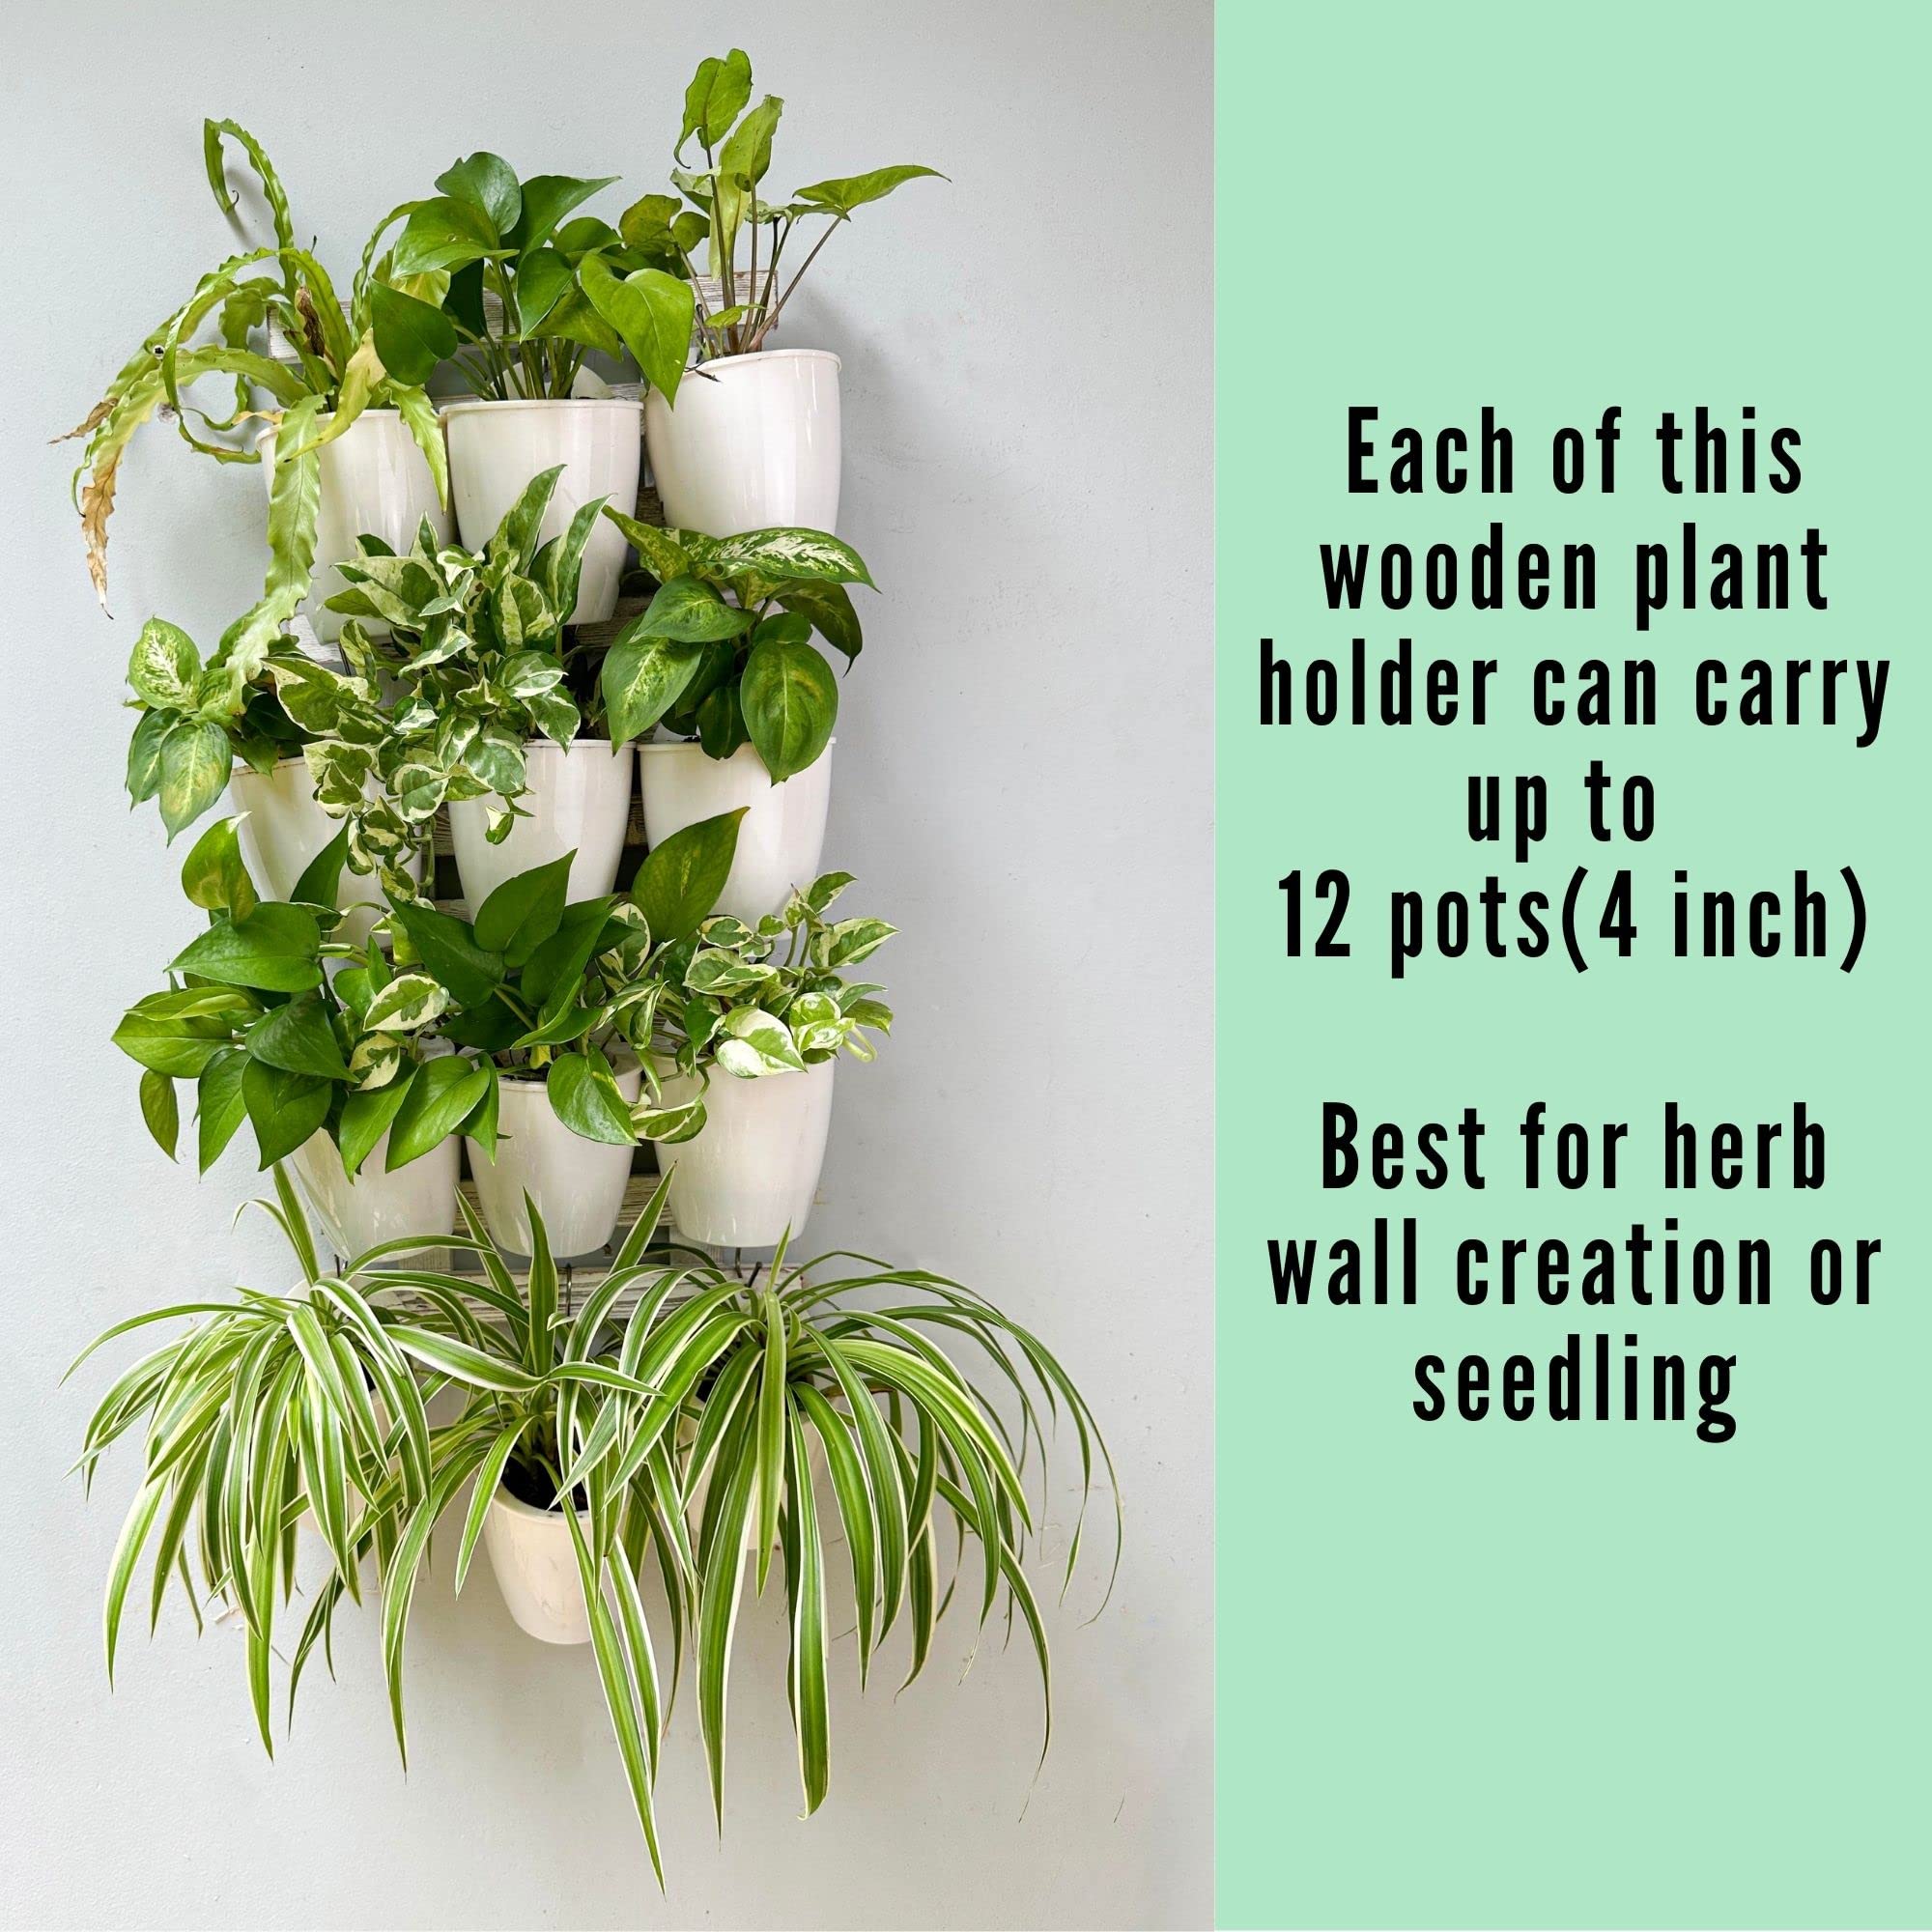 ShopLaLa Wooden Wall Planter - 2 Pack Wall Hanging Planters for Outdoor Plants Rustic White Wall Mounted Wood Ladder for Flower Pots Holder Vertical Herb Garden System Green Decor 23.6